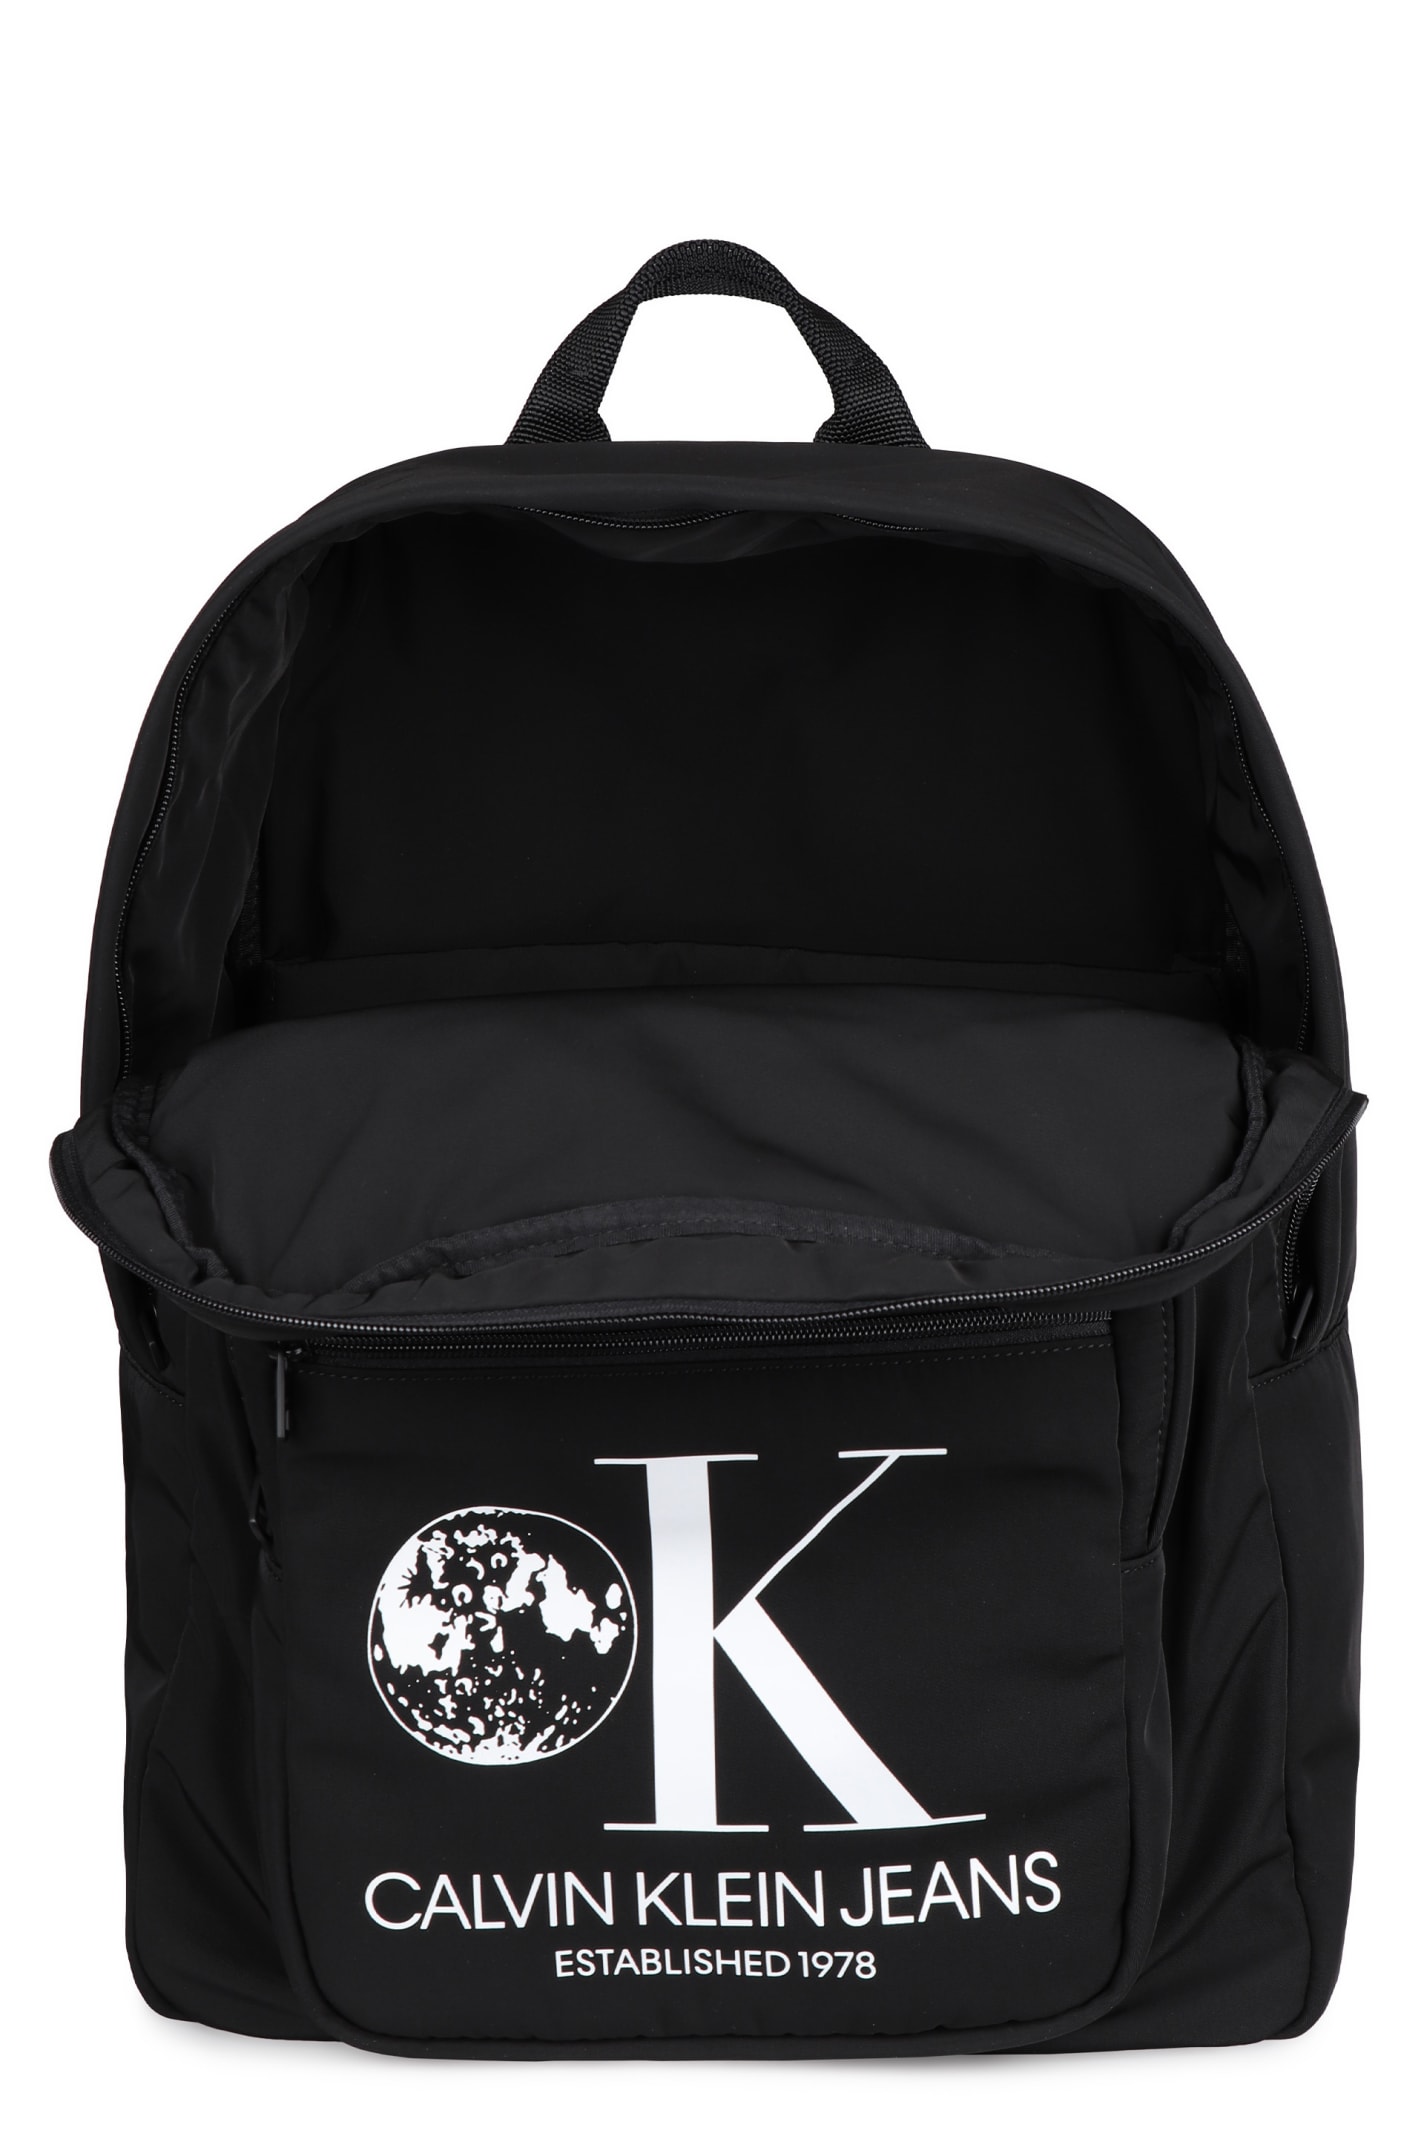 ck backpack price